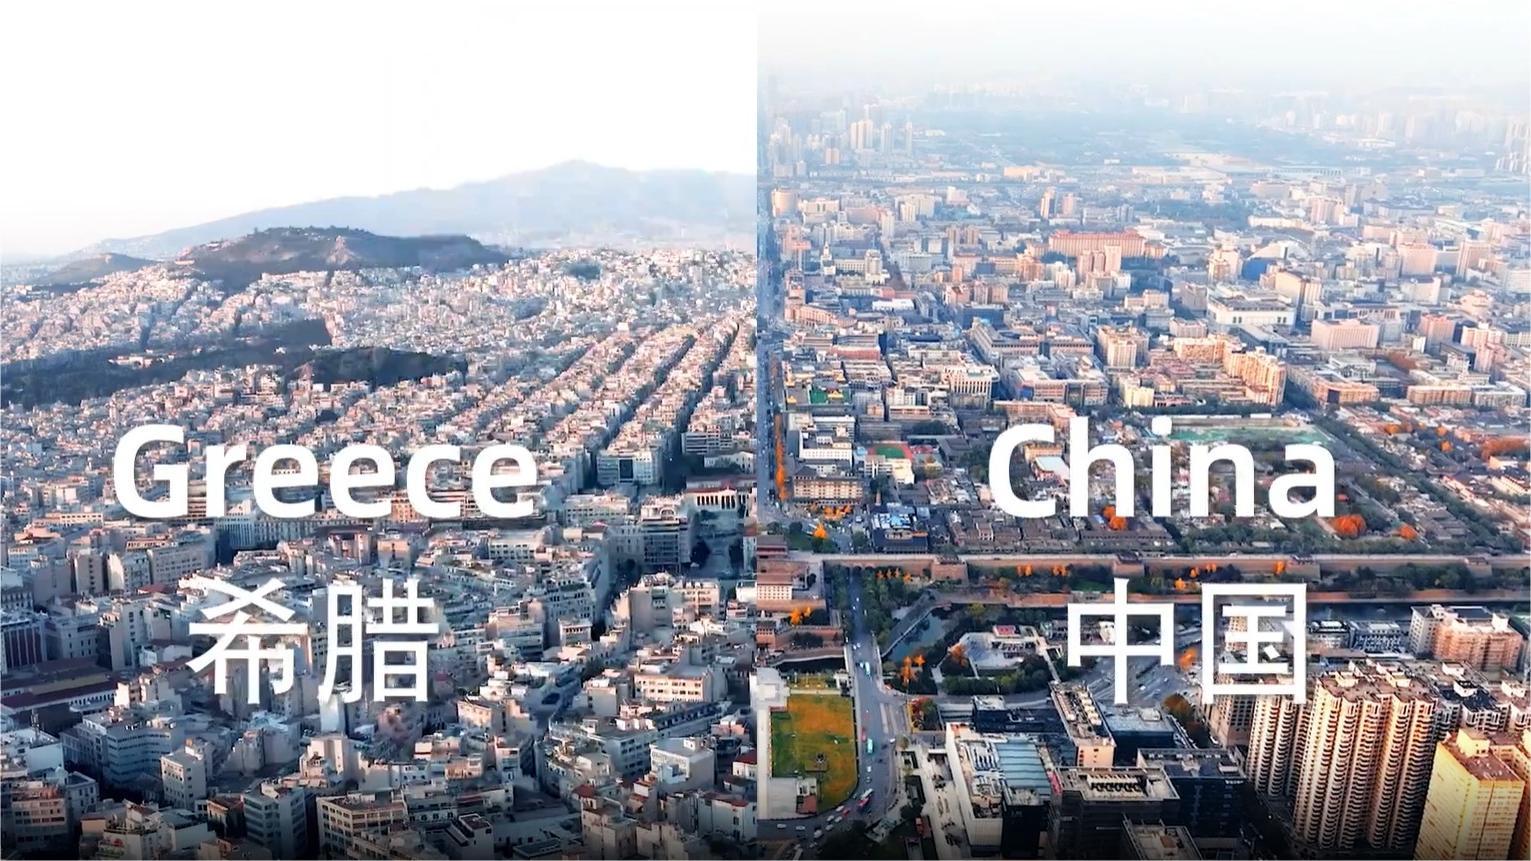 China meets Greece: Echoes across civilization